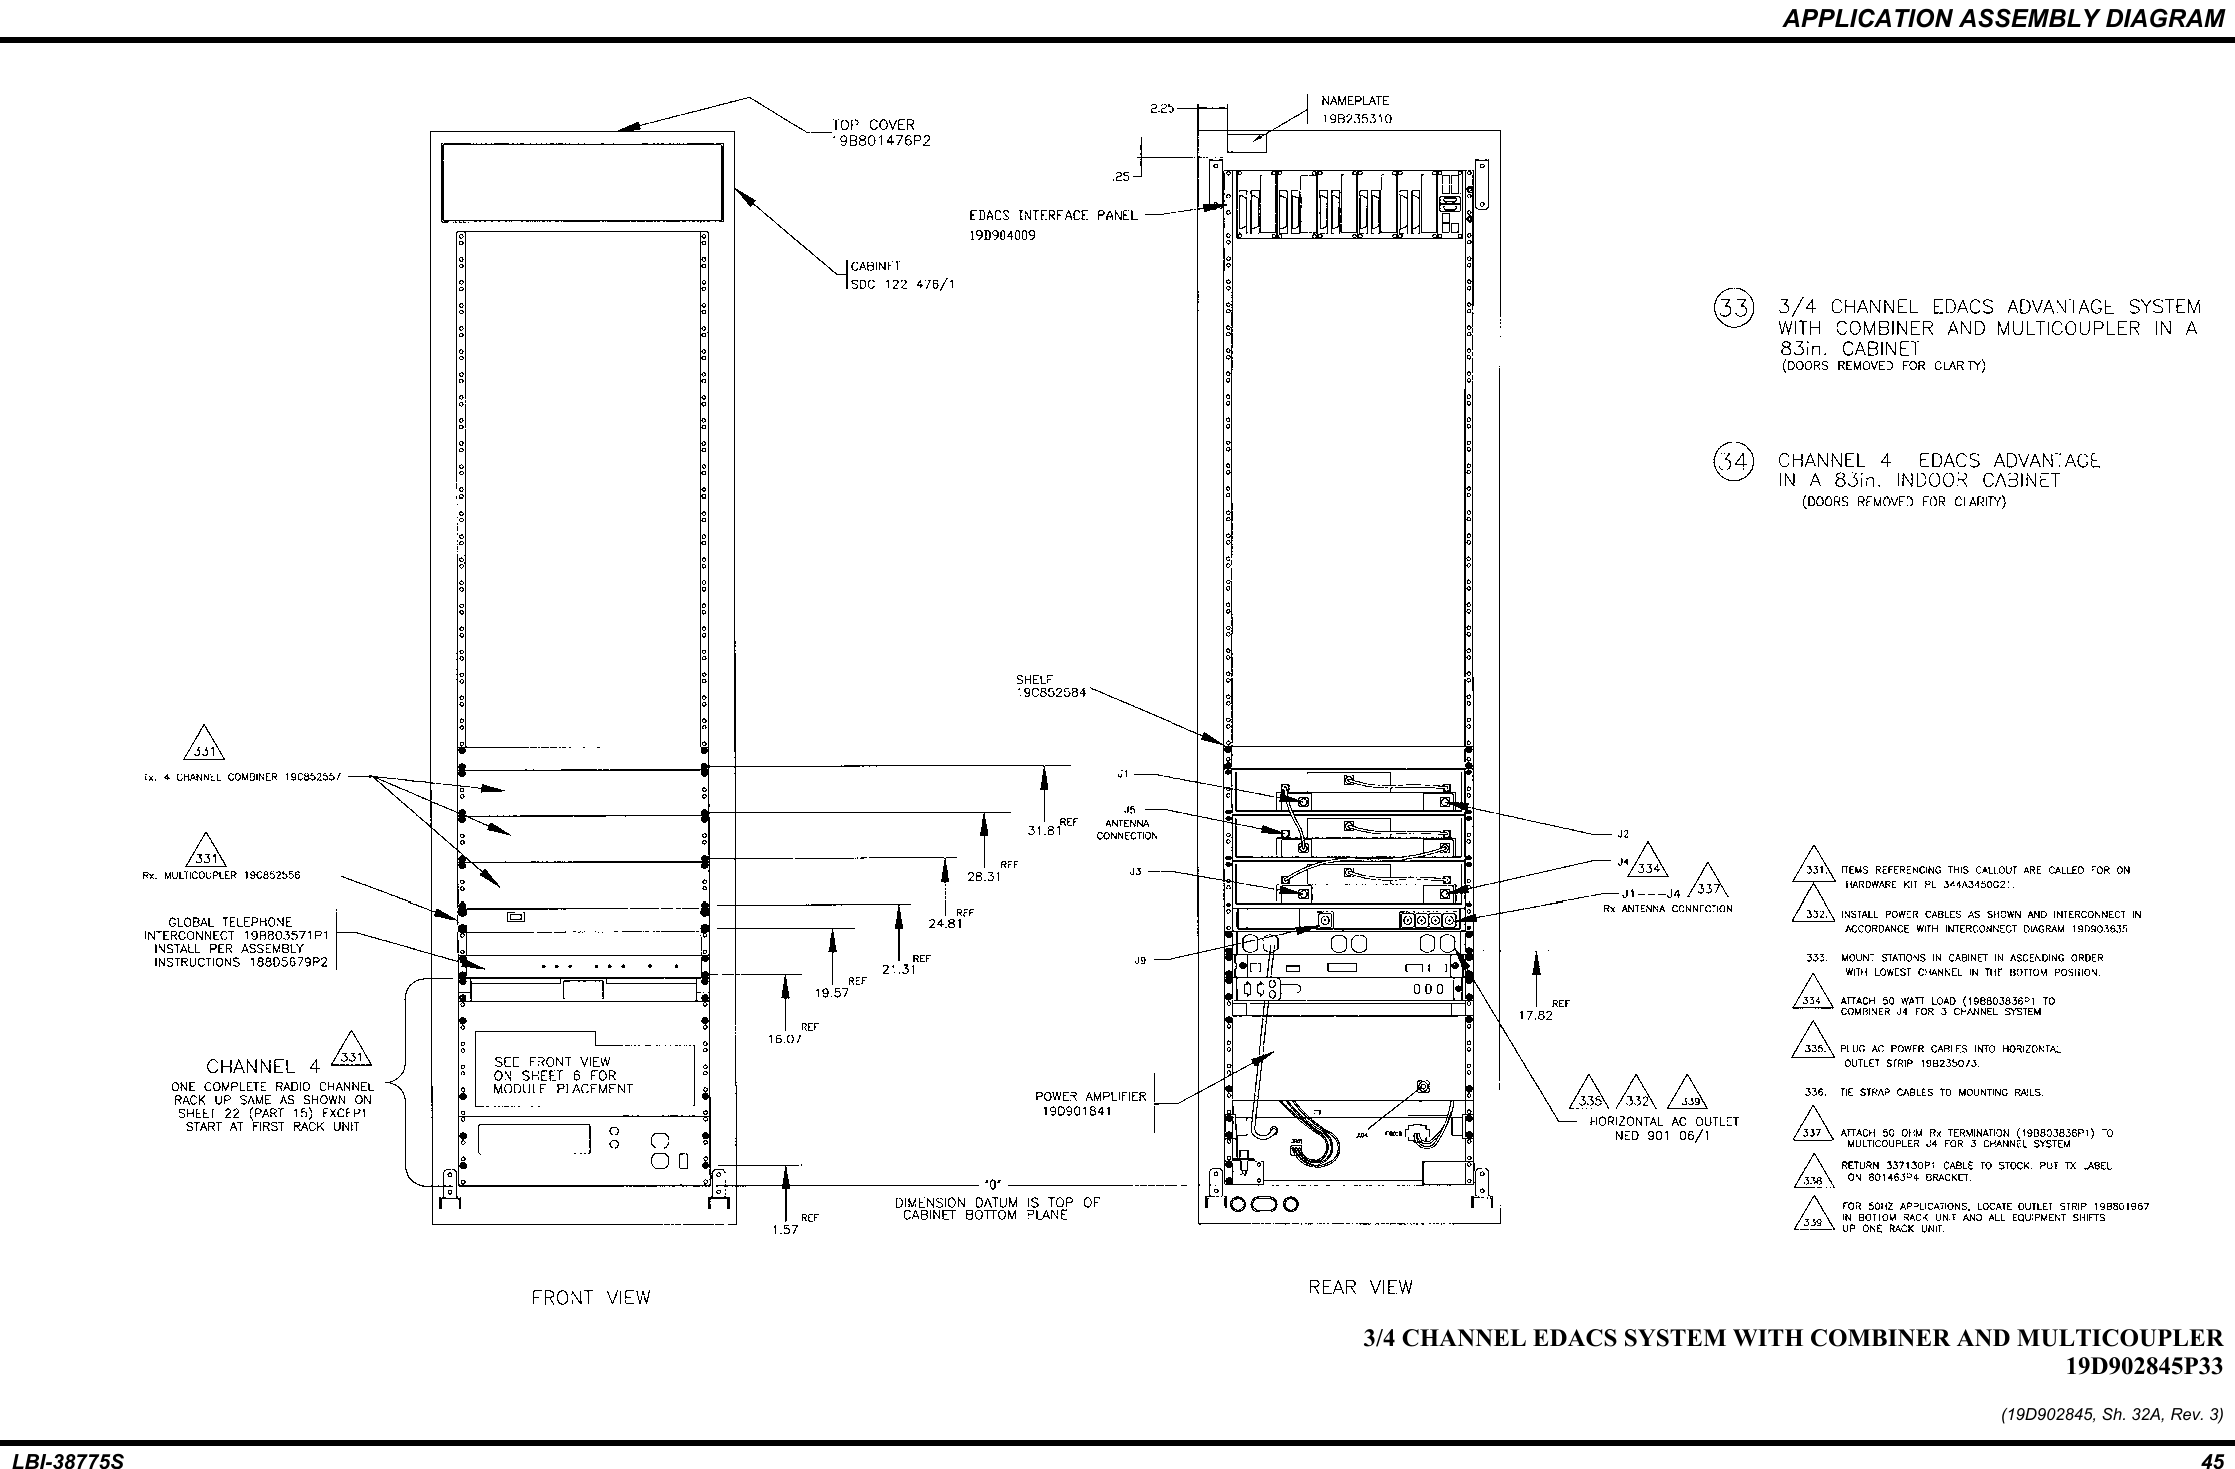 APPLICATION ASSEMBLY DIAGRAMLBI-38775S 453/4 CHANNEL EDACS SYSTEM WITH COMBINER AND MULTICOUPLER19D902845P33(19D902845, Sh. 32A, Rev. 3)